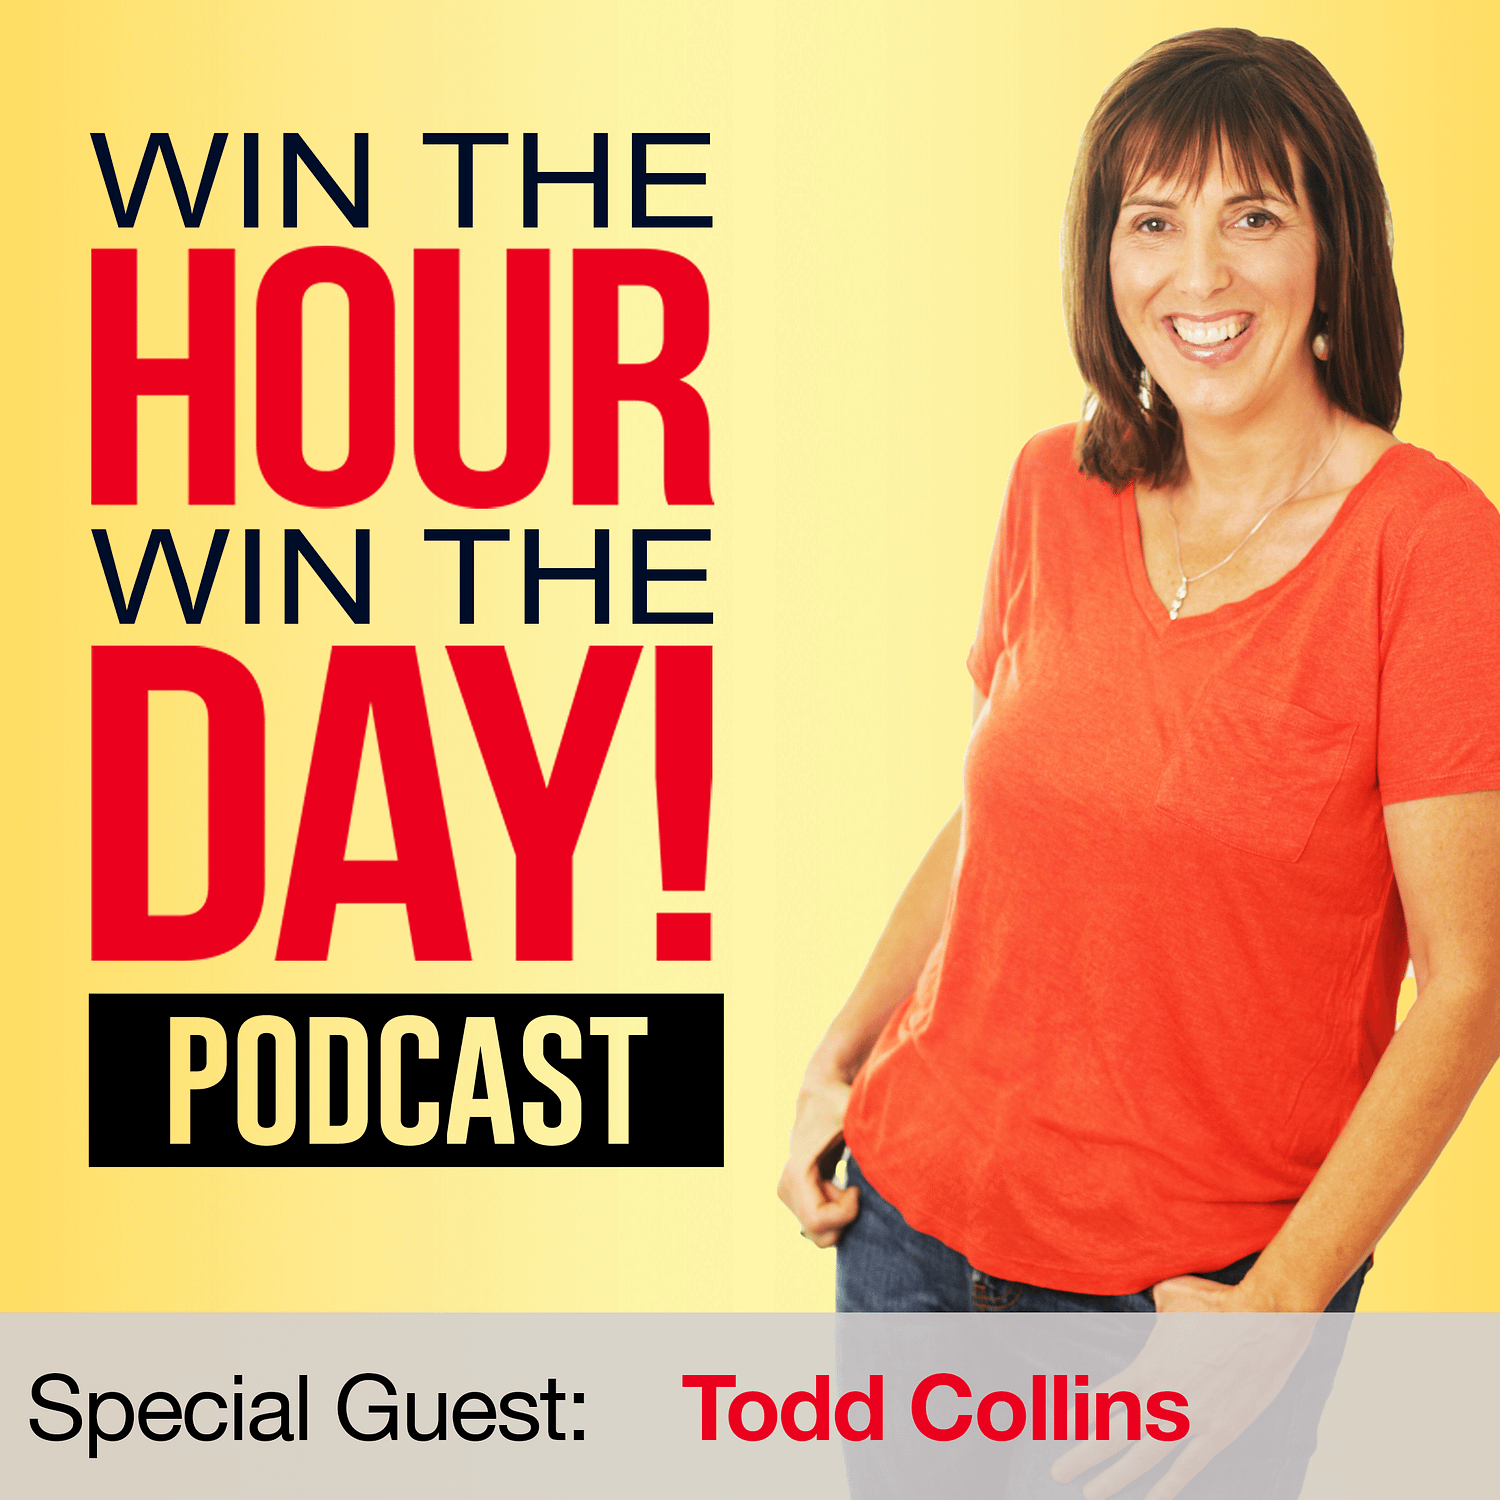 How To Make Social Media Finally Work For You! with Todd Collins